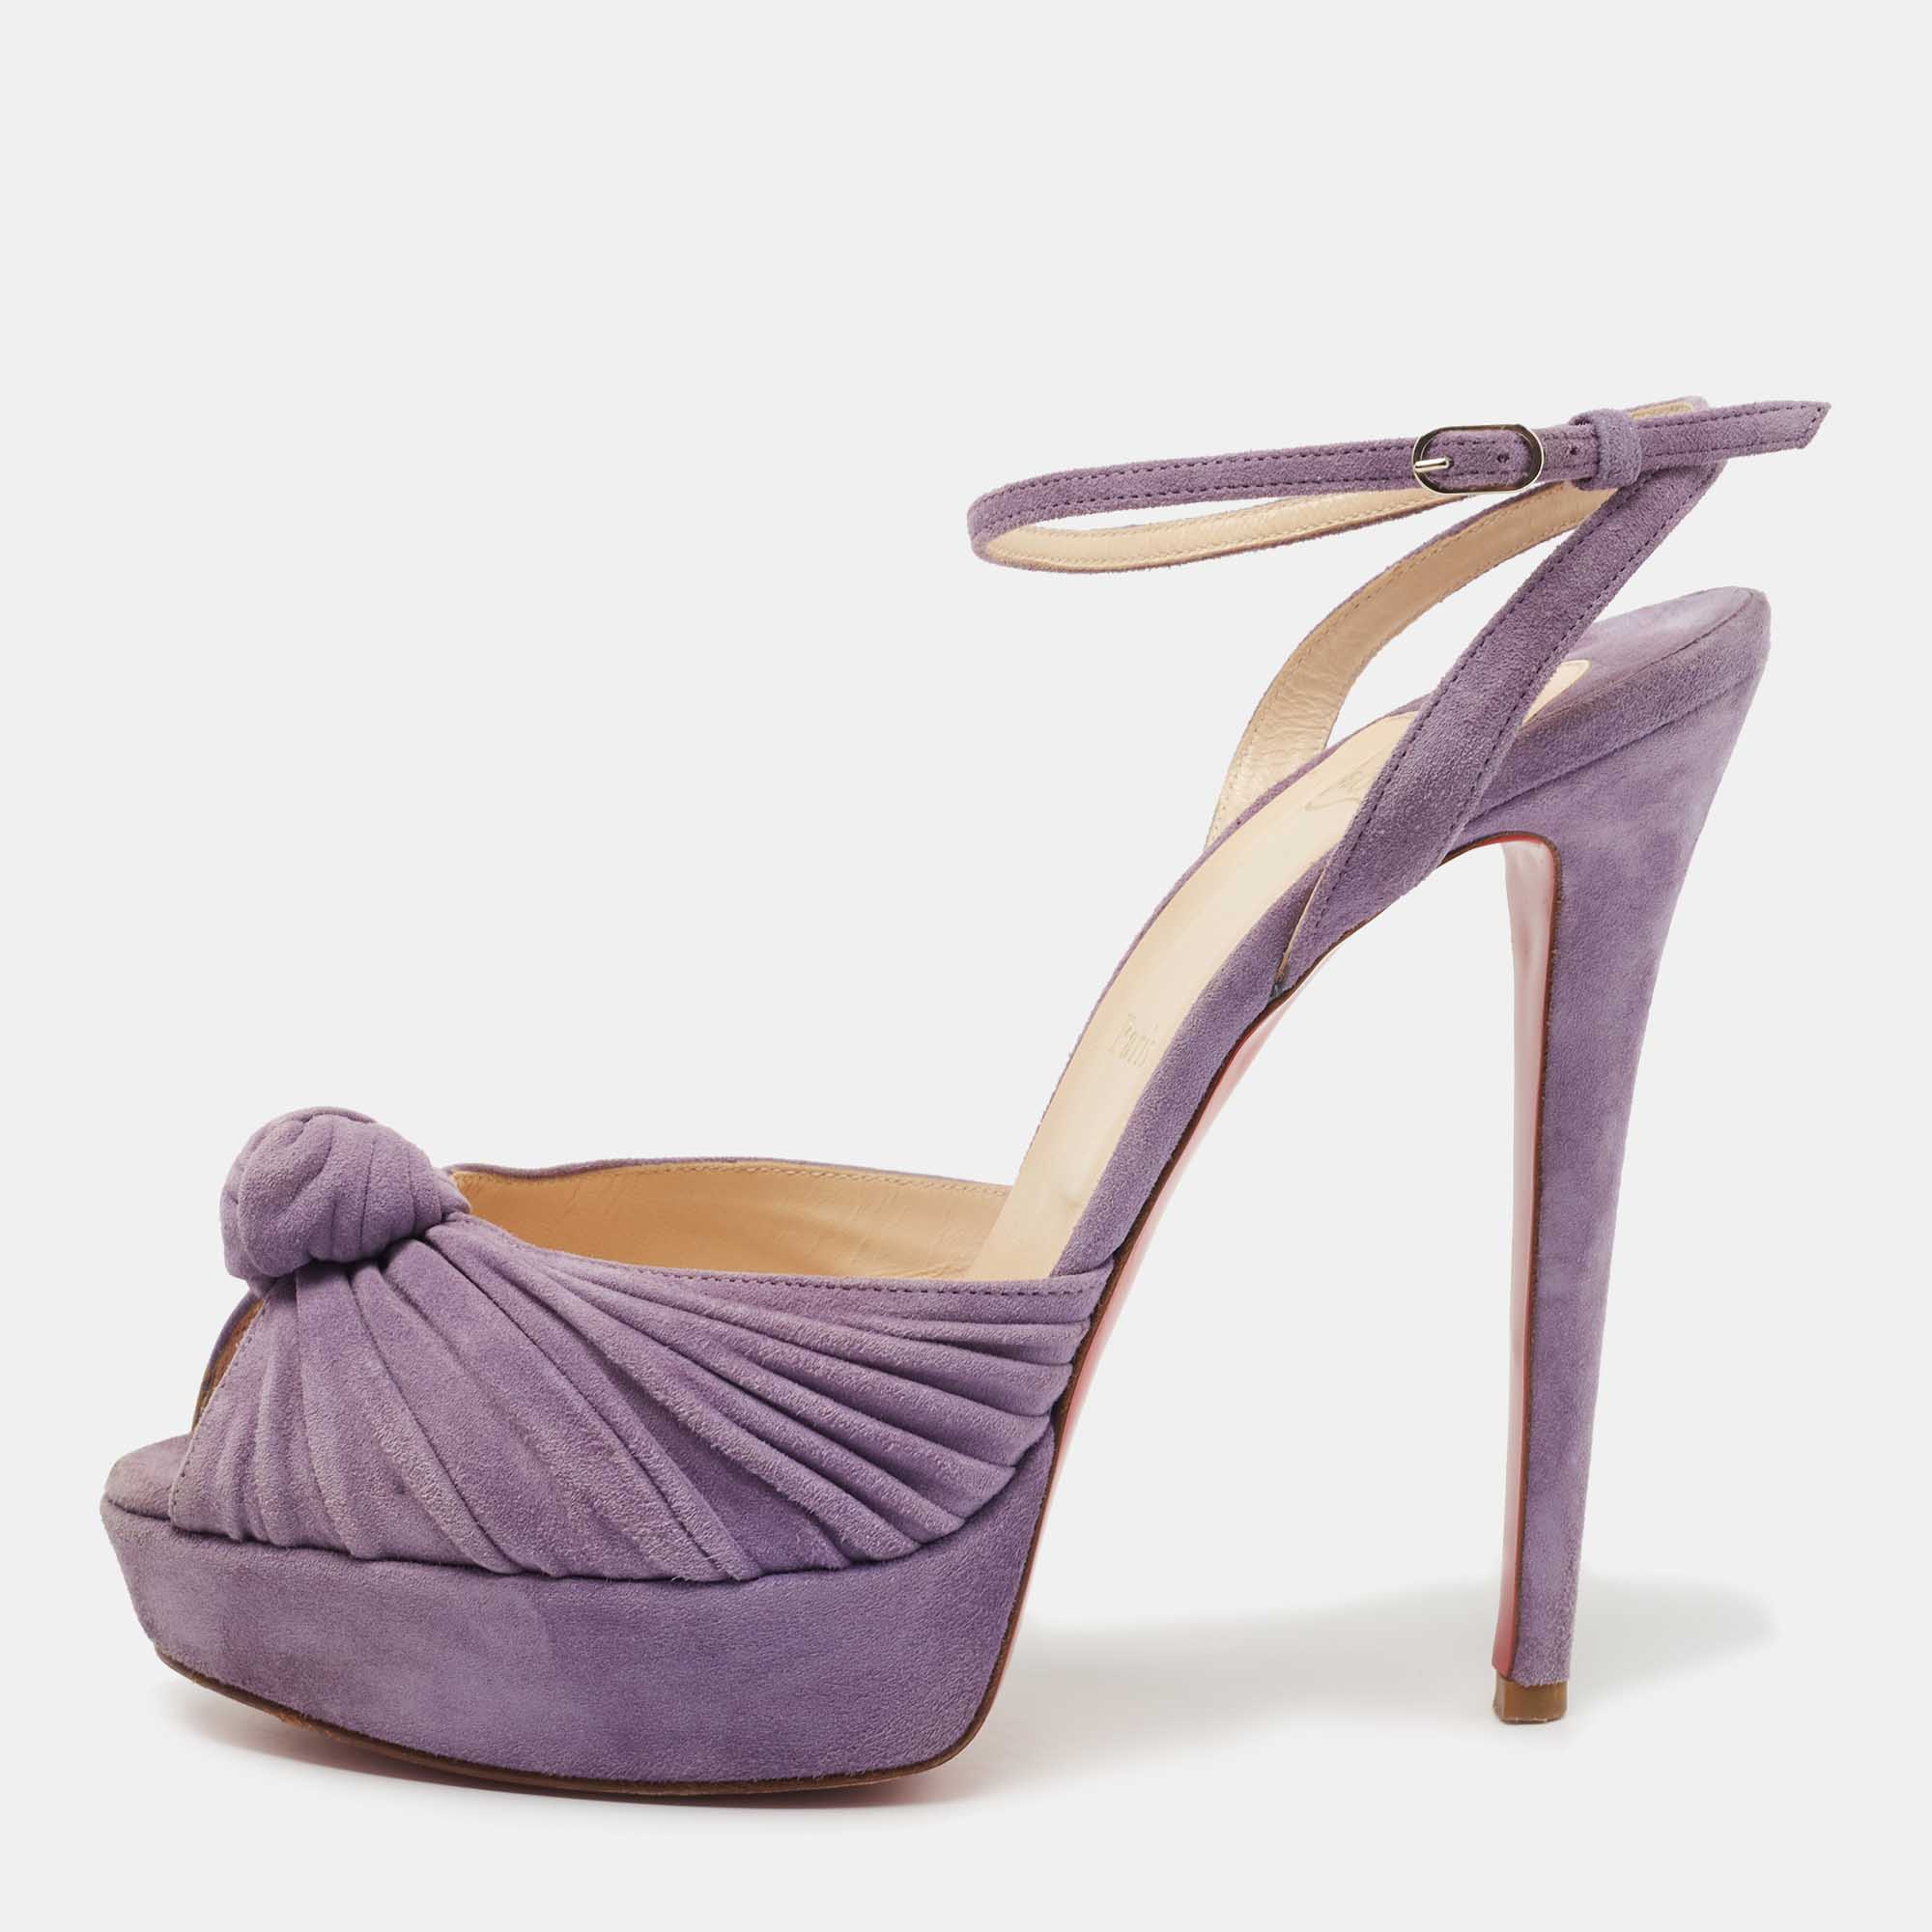 Christian louboutin purple suede greissimo ankle strap sandals size 40.5